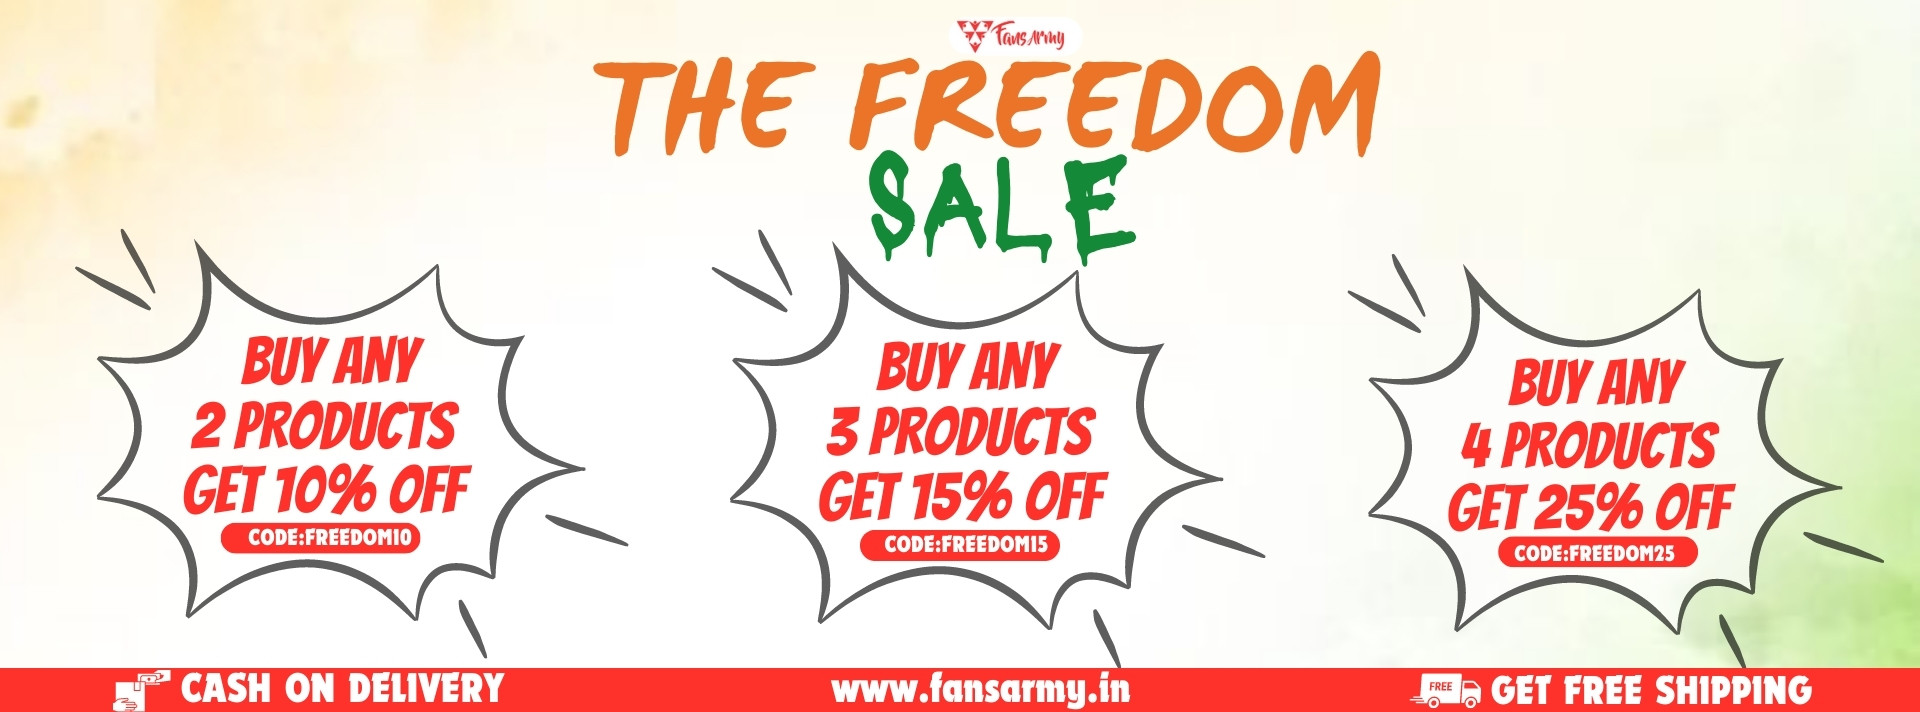 The Freedom Sale